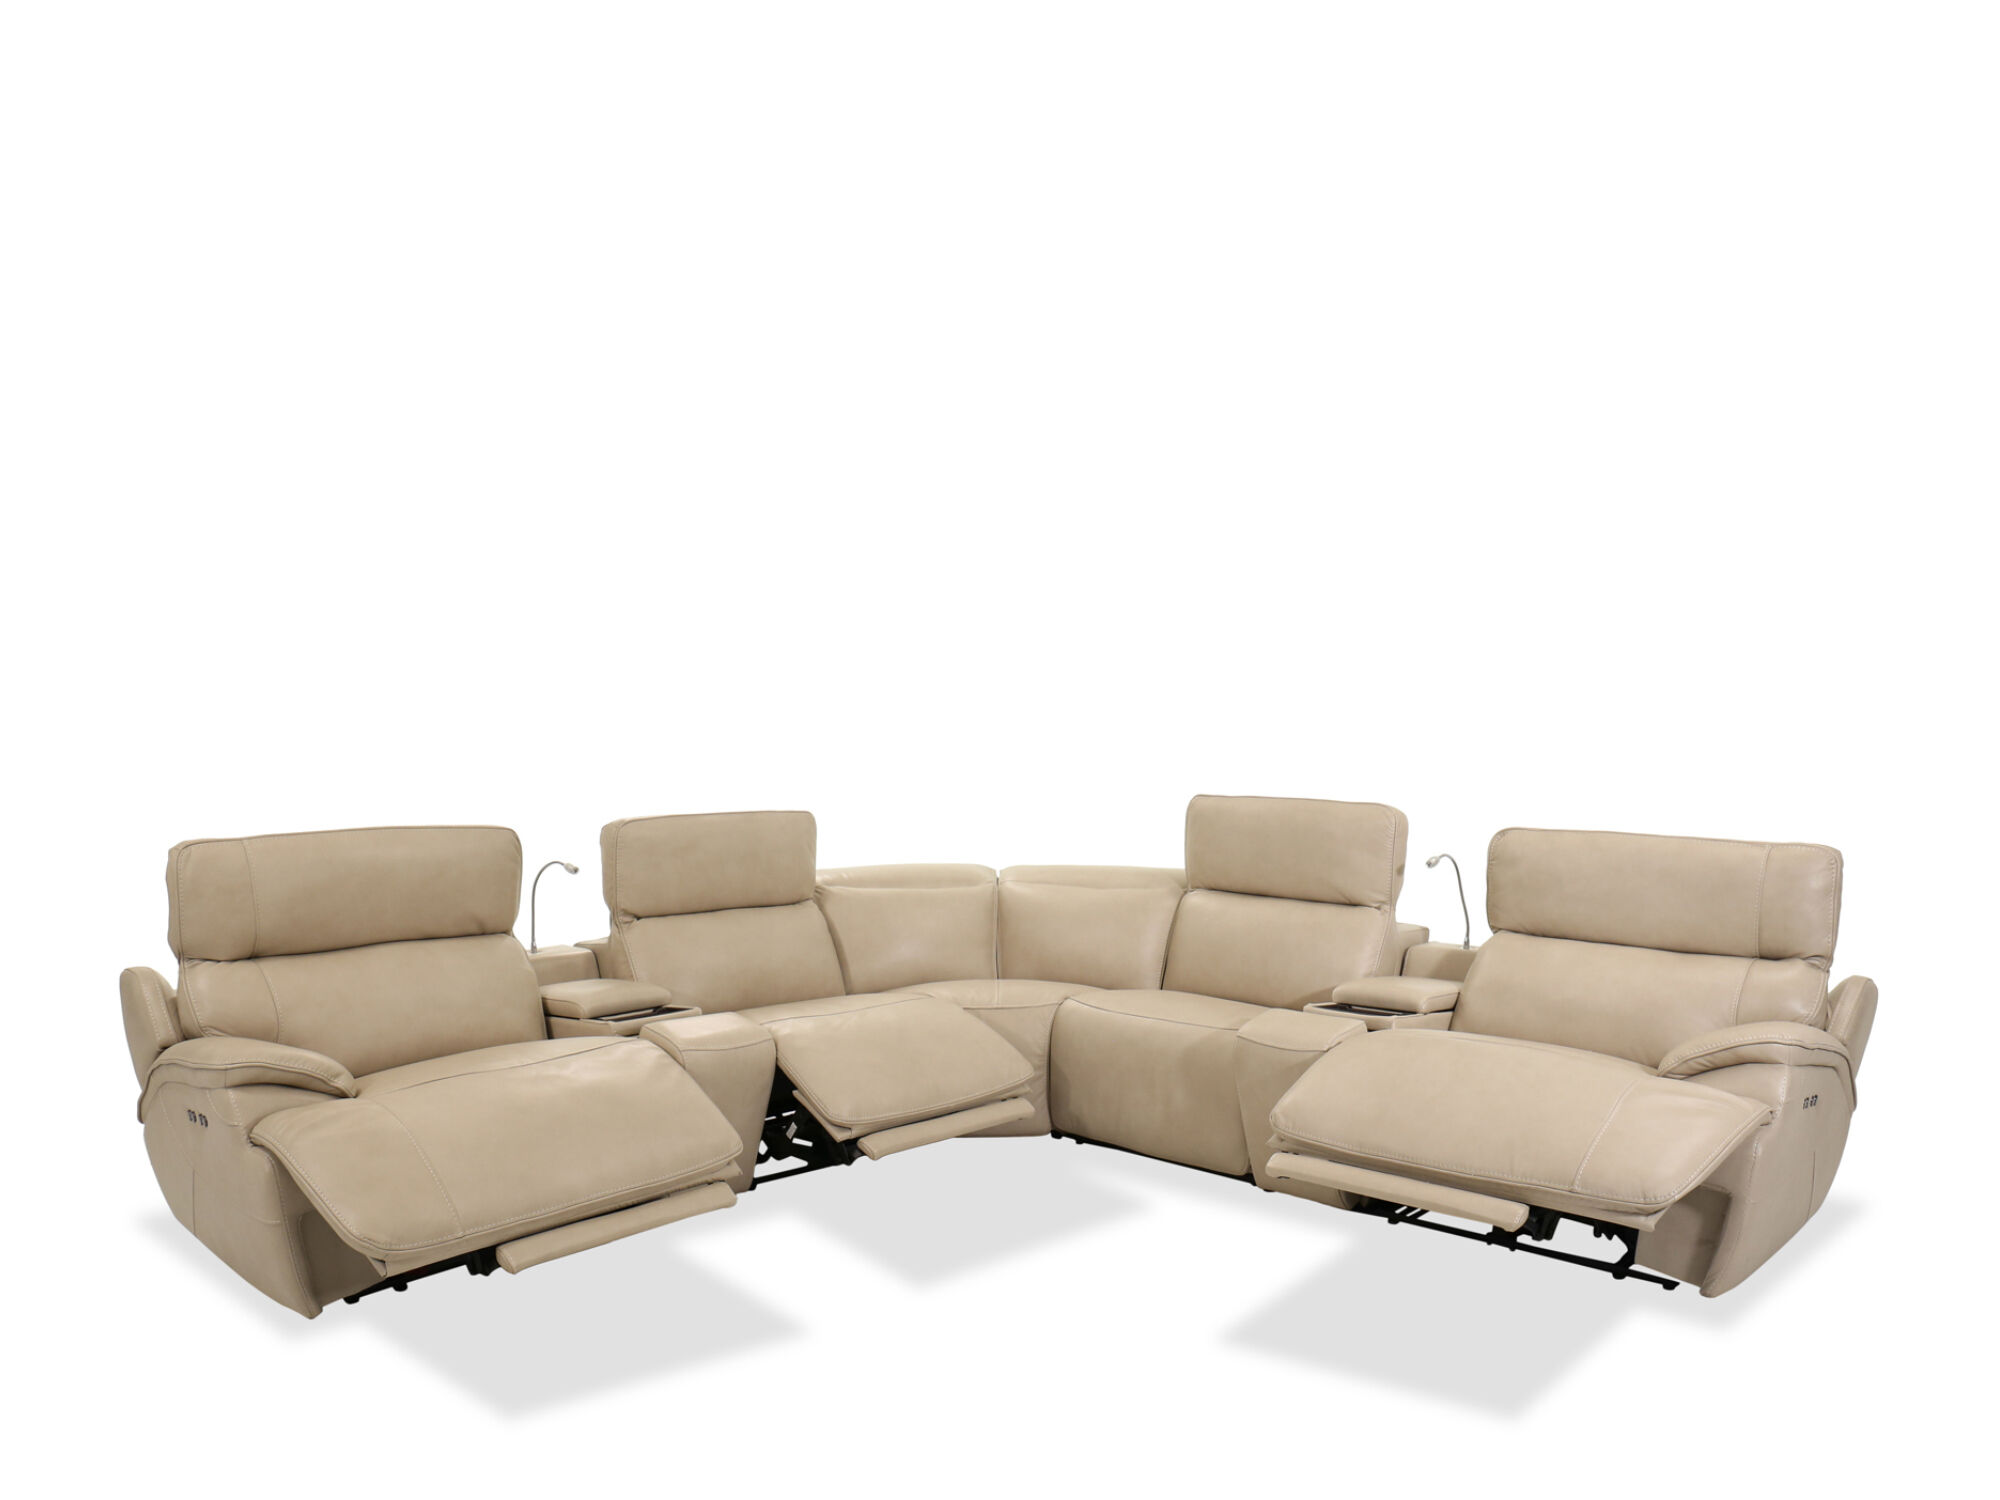 Seven Piece Leather Recliner Sectional, Leather Recliner Sectionals